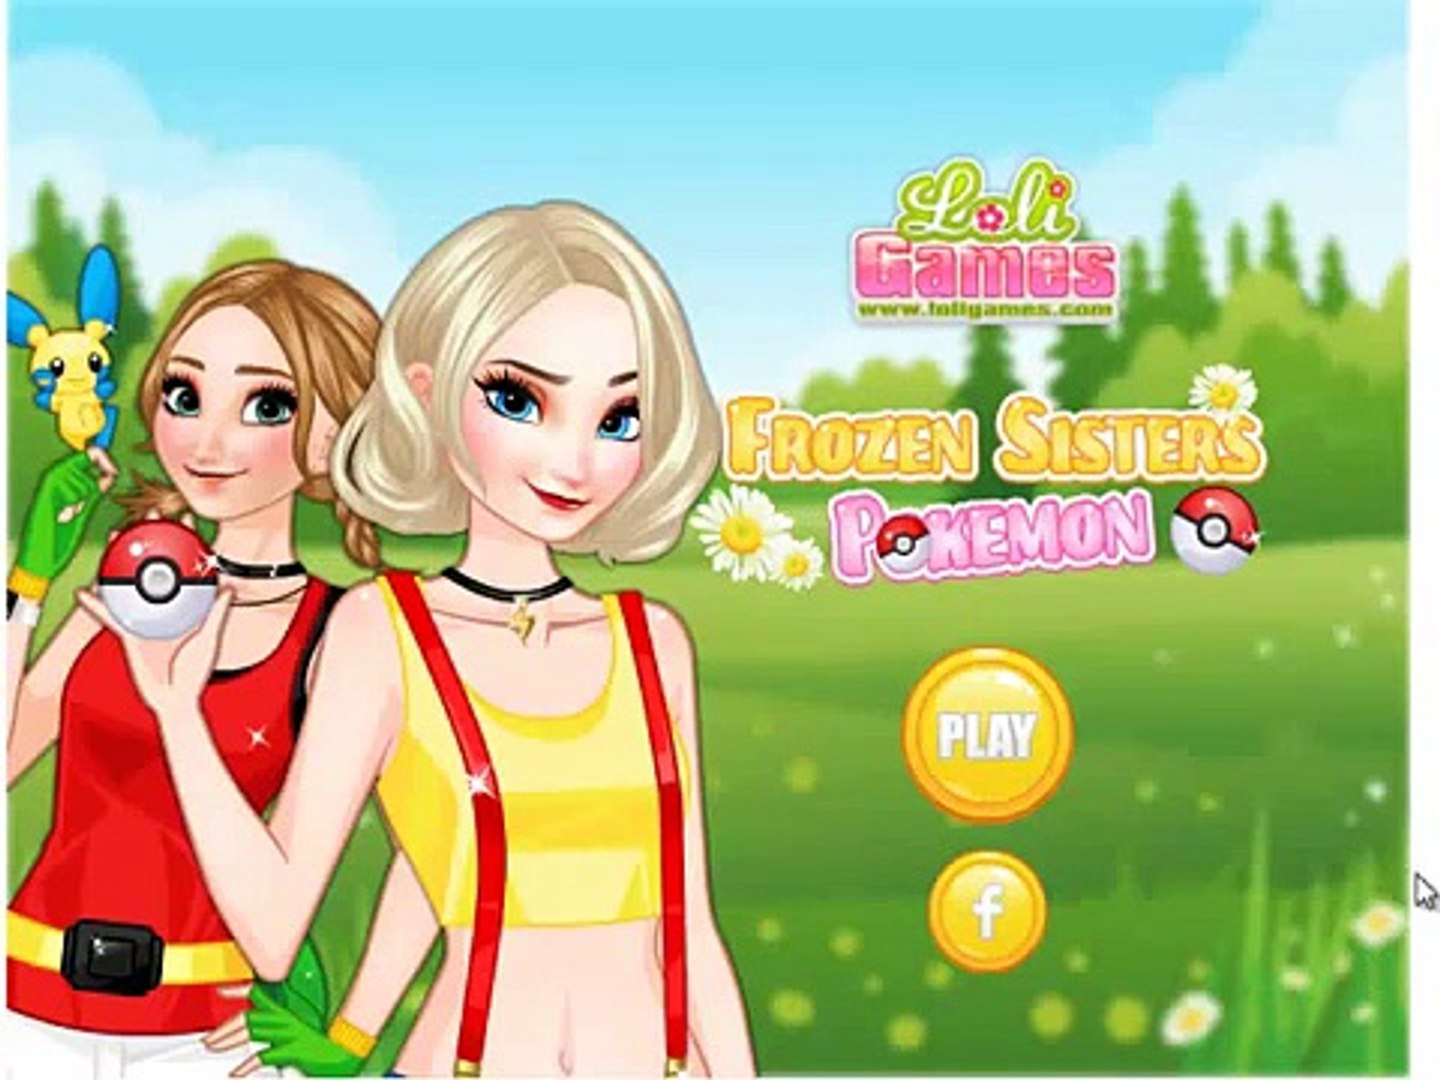 Frozen sisters pokimon game , best game play for kids , super game for kids , fun game for kids , ni